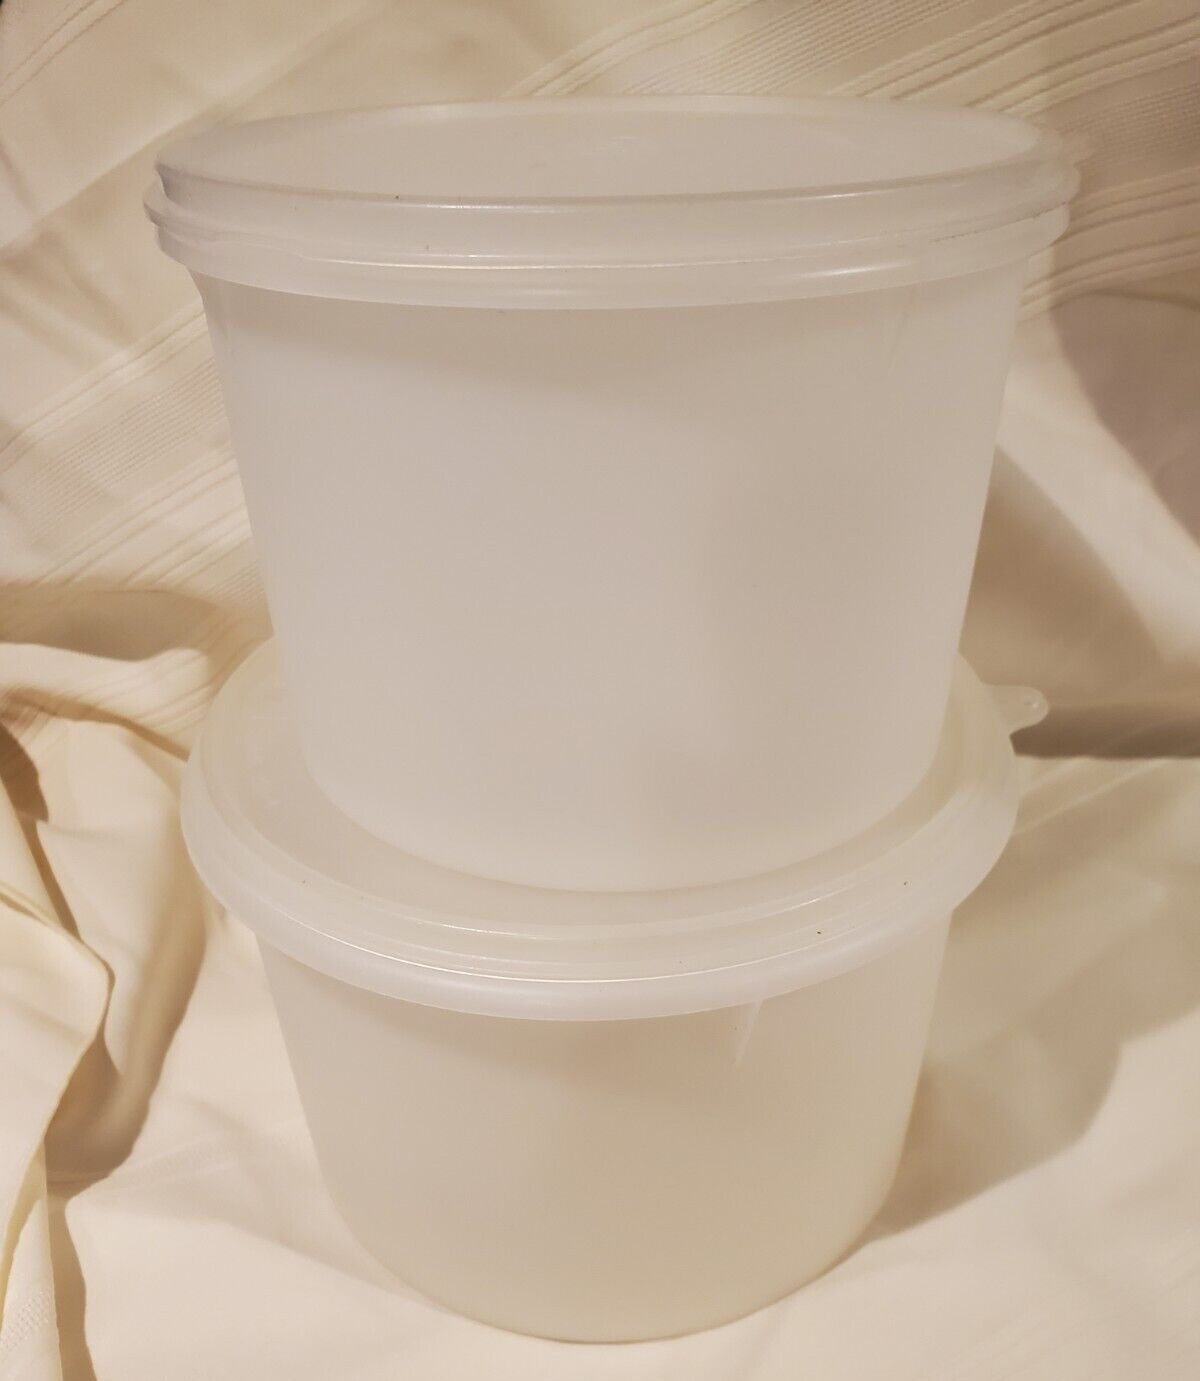 Vintage Tupperware Round Storage Containers Med #266  Sm #265   Set of 2 W Lids